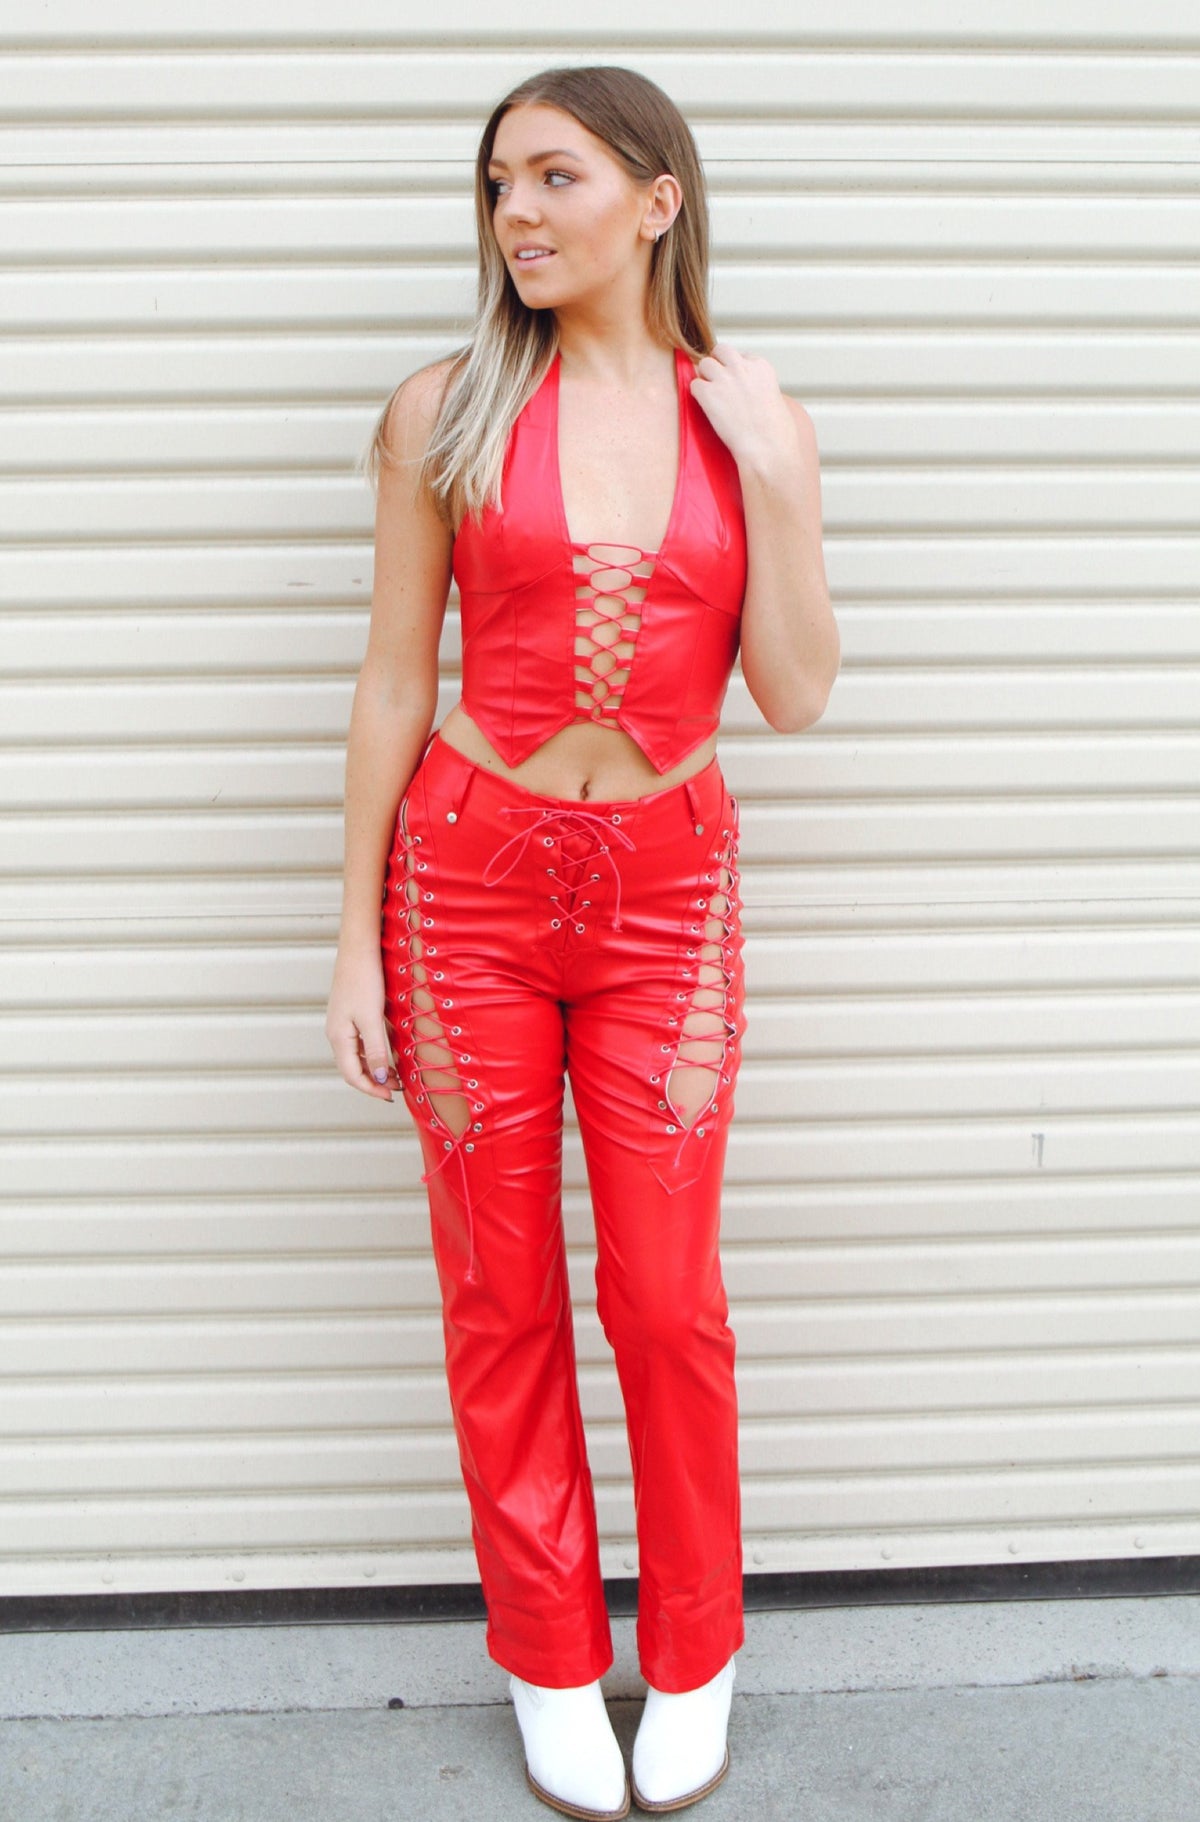 Red Hot Leather Lace Up Pants